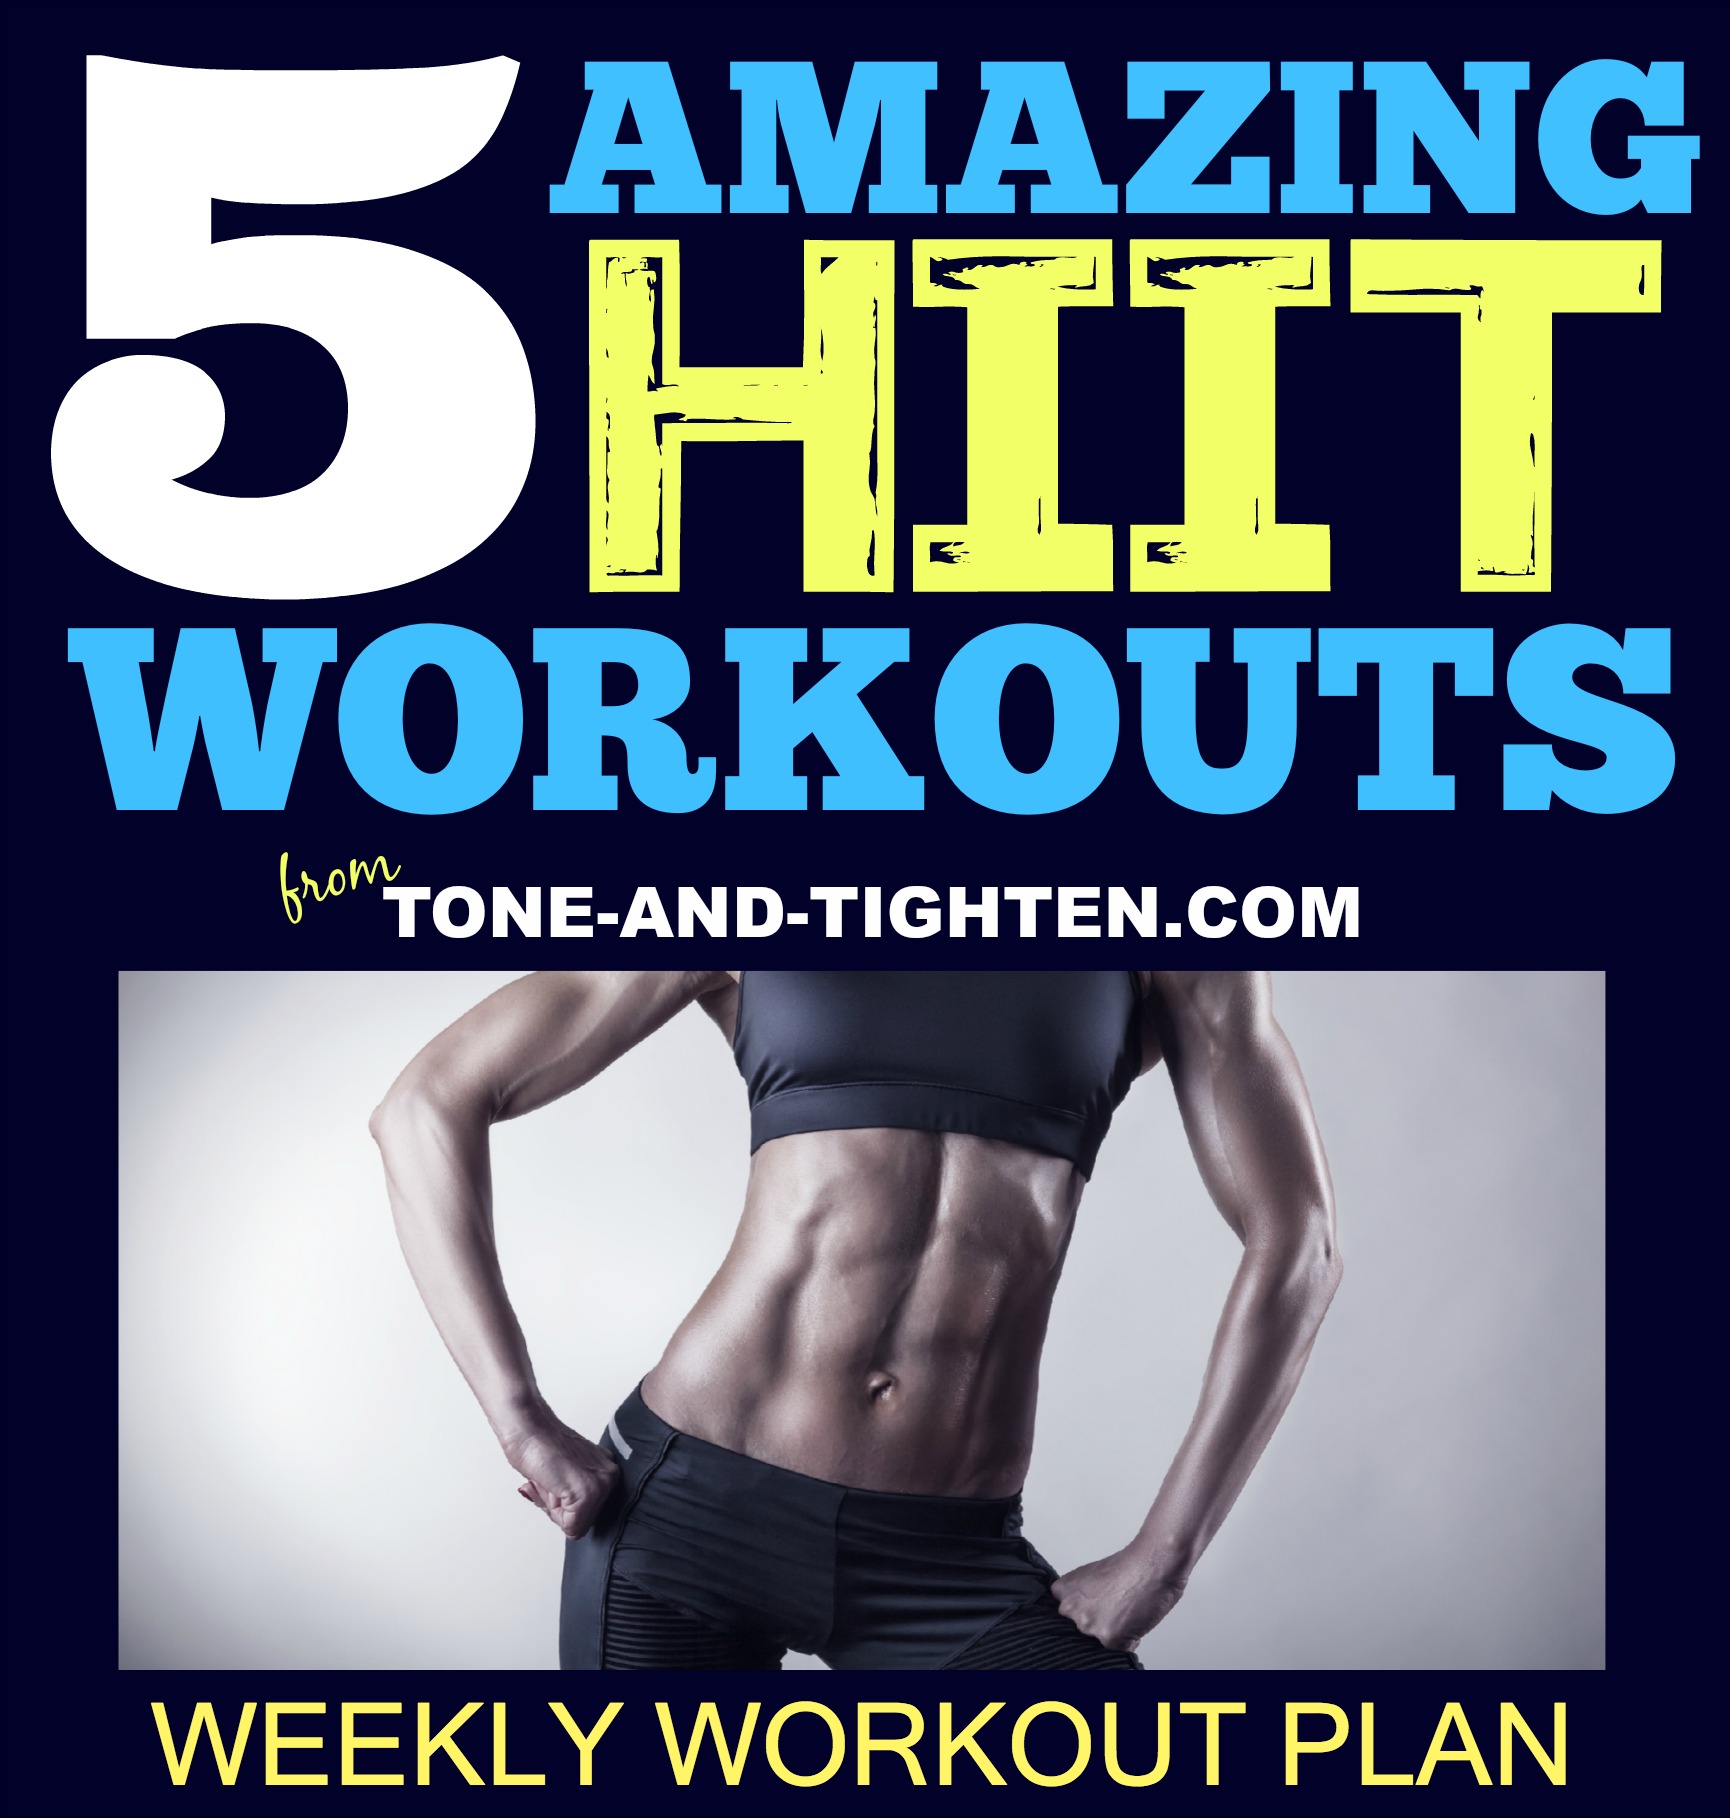 5 Interval Workouts to Tone and Tighten